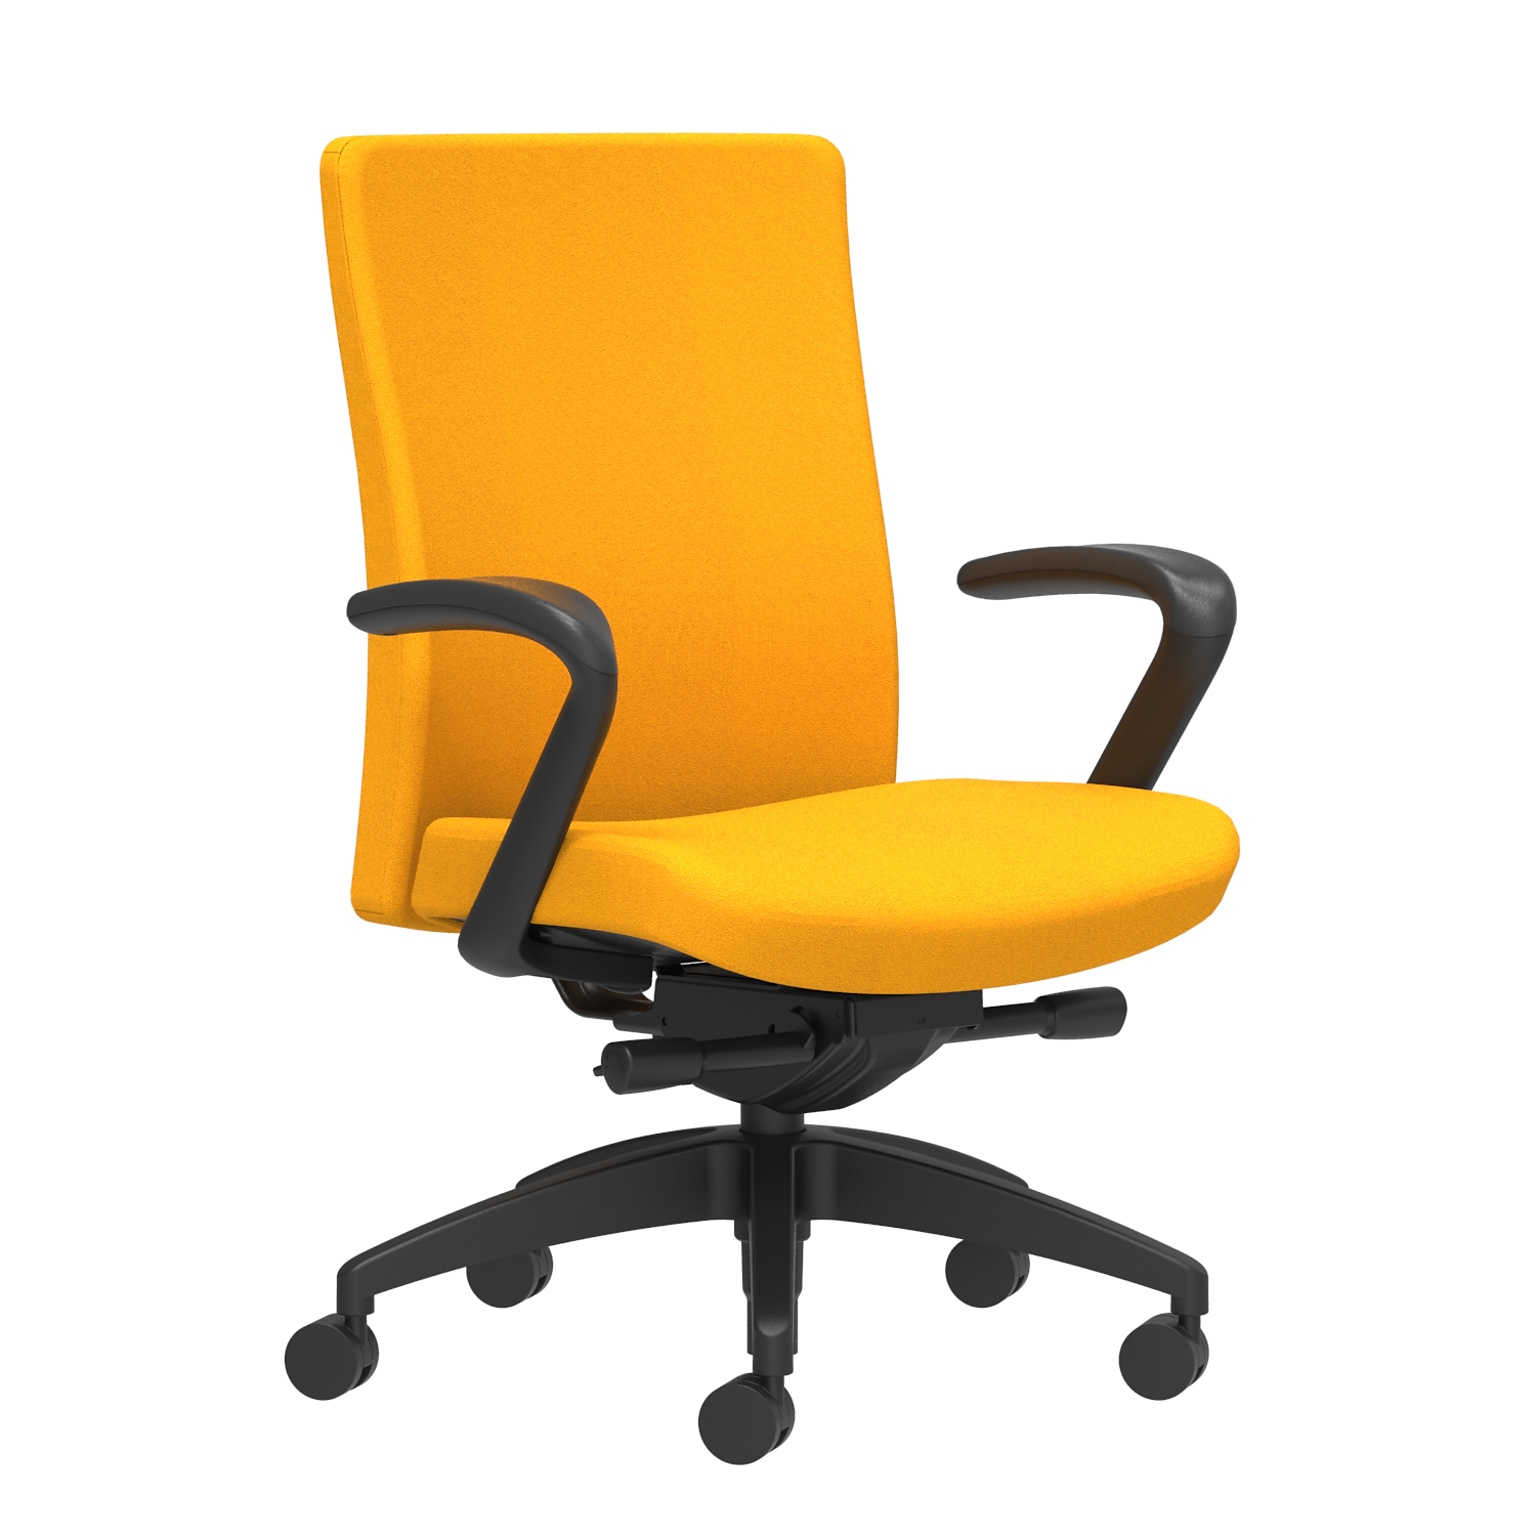 Union & Scale Workplace2.0™ Task Chair Upholstered, Fixed Arms, Goldenrod Fabric, Synchro Tilt Seat Slide (54185)